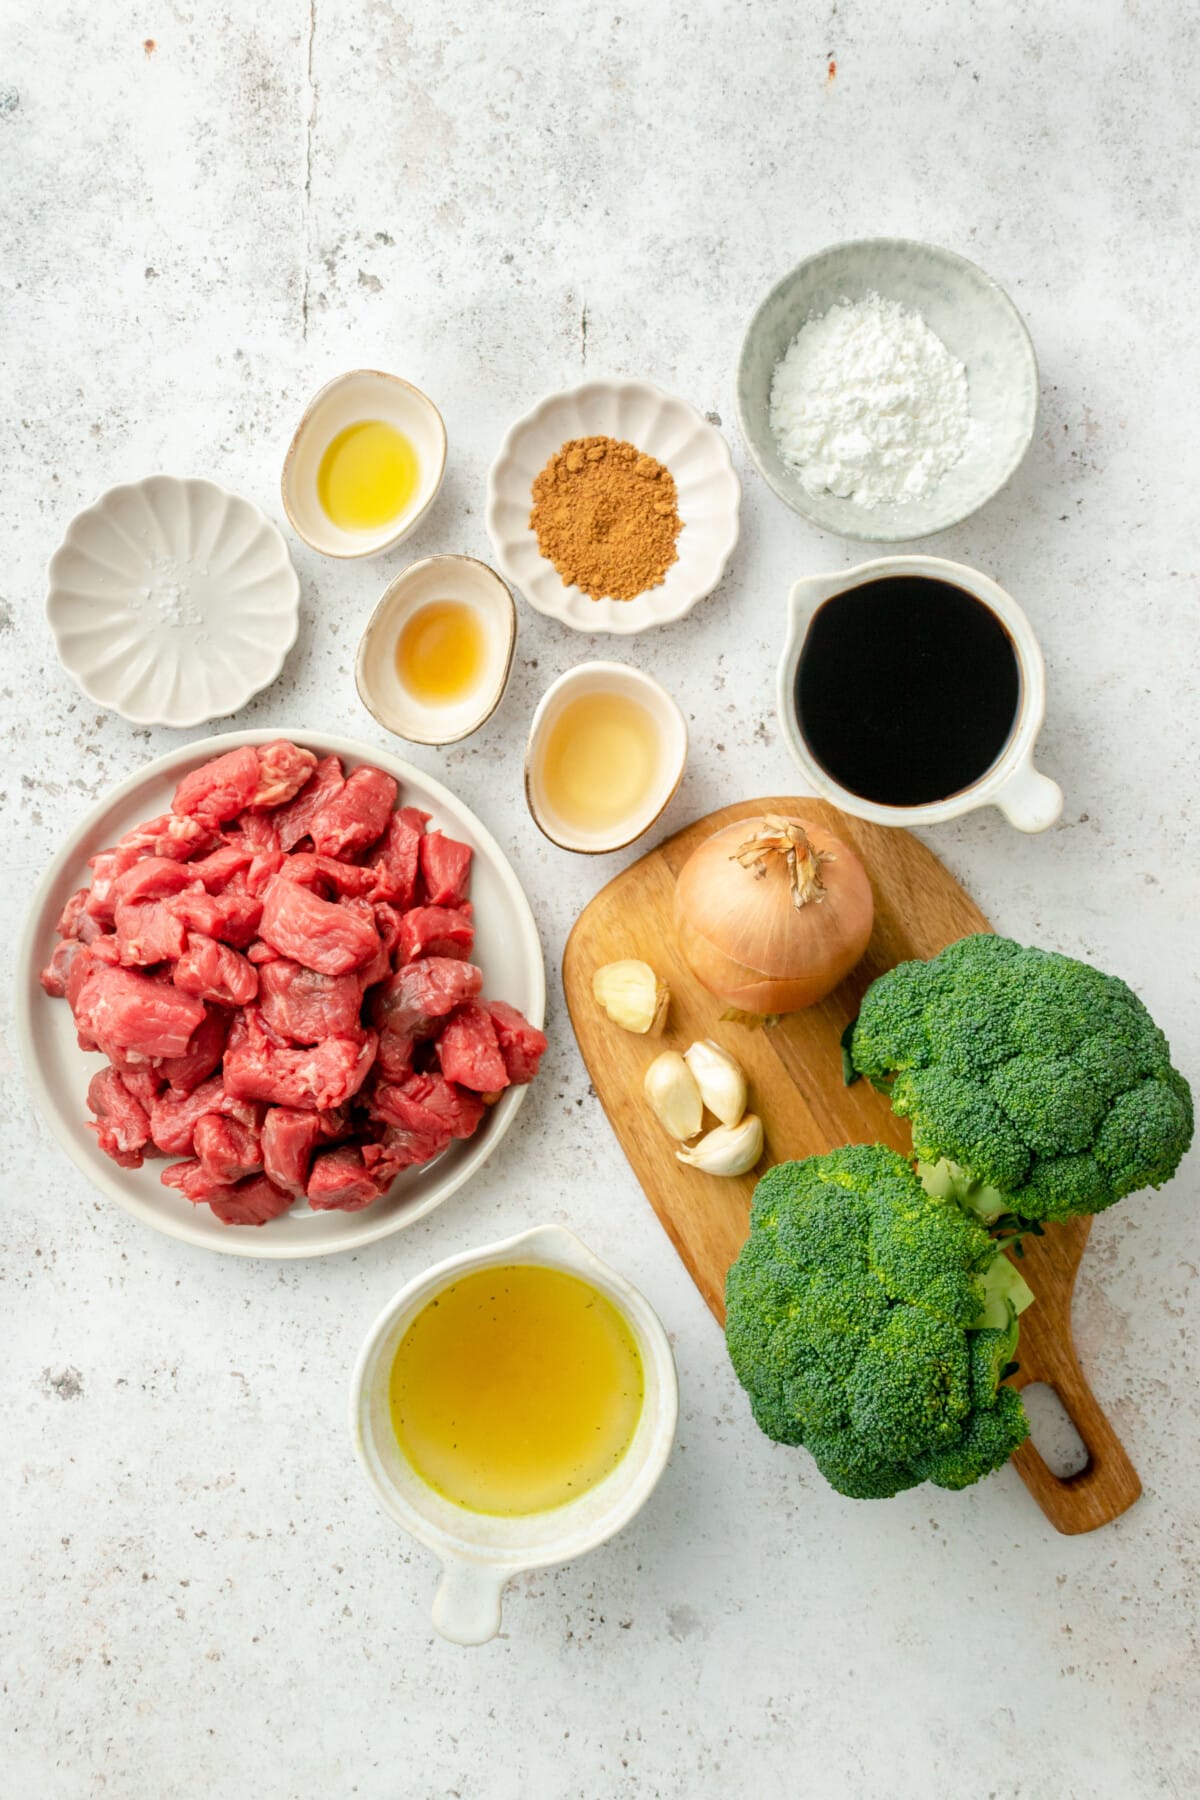 Ingredients for Instant Pot Beef Brocoli are laid out in a variety of bowls and plates on a light grey colored surface.